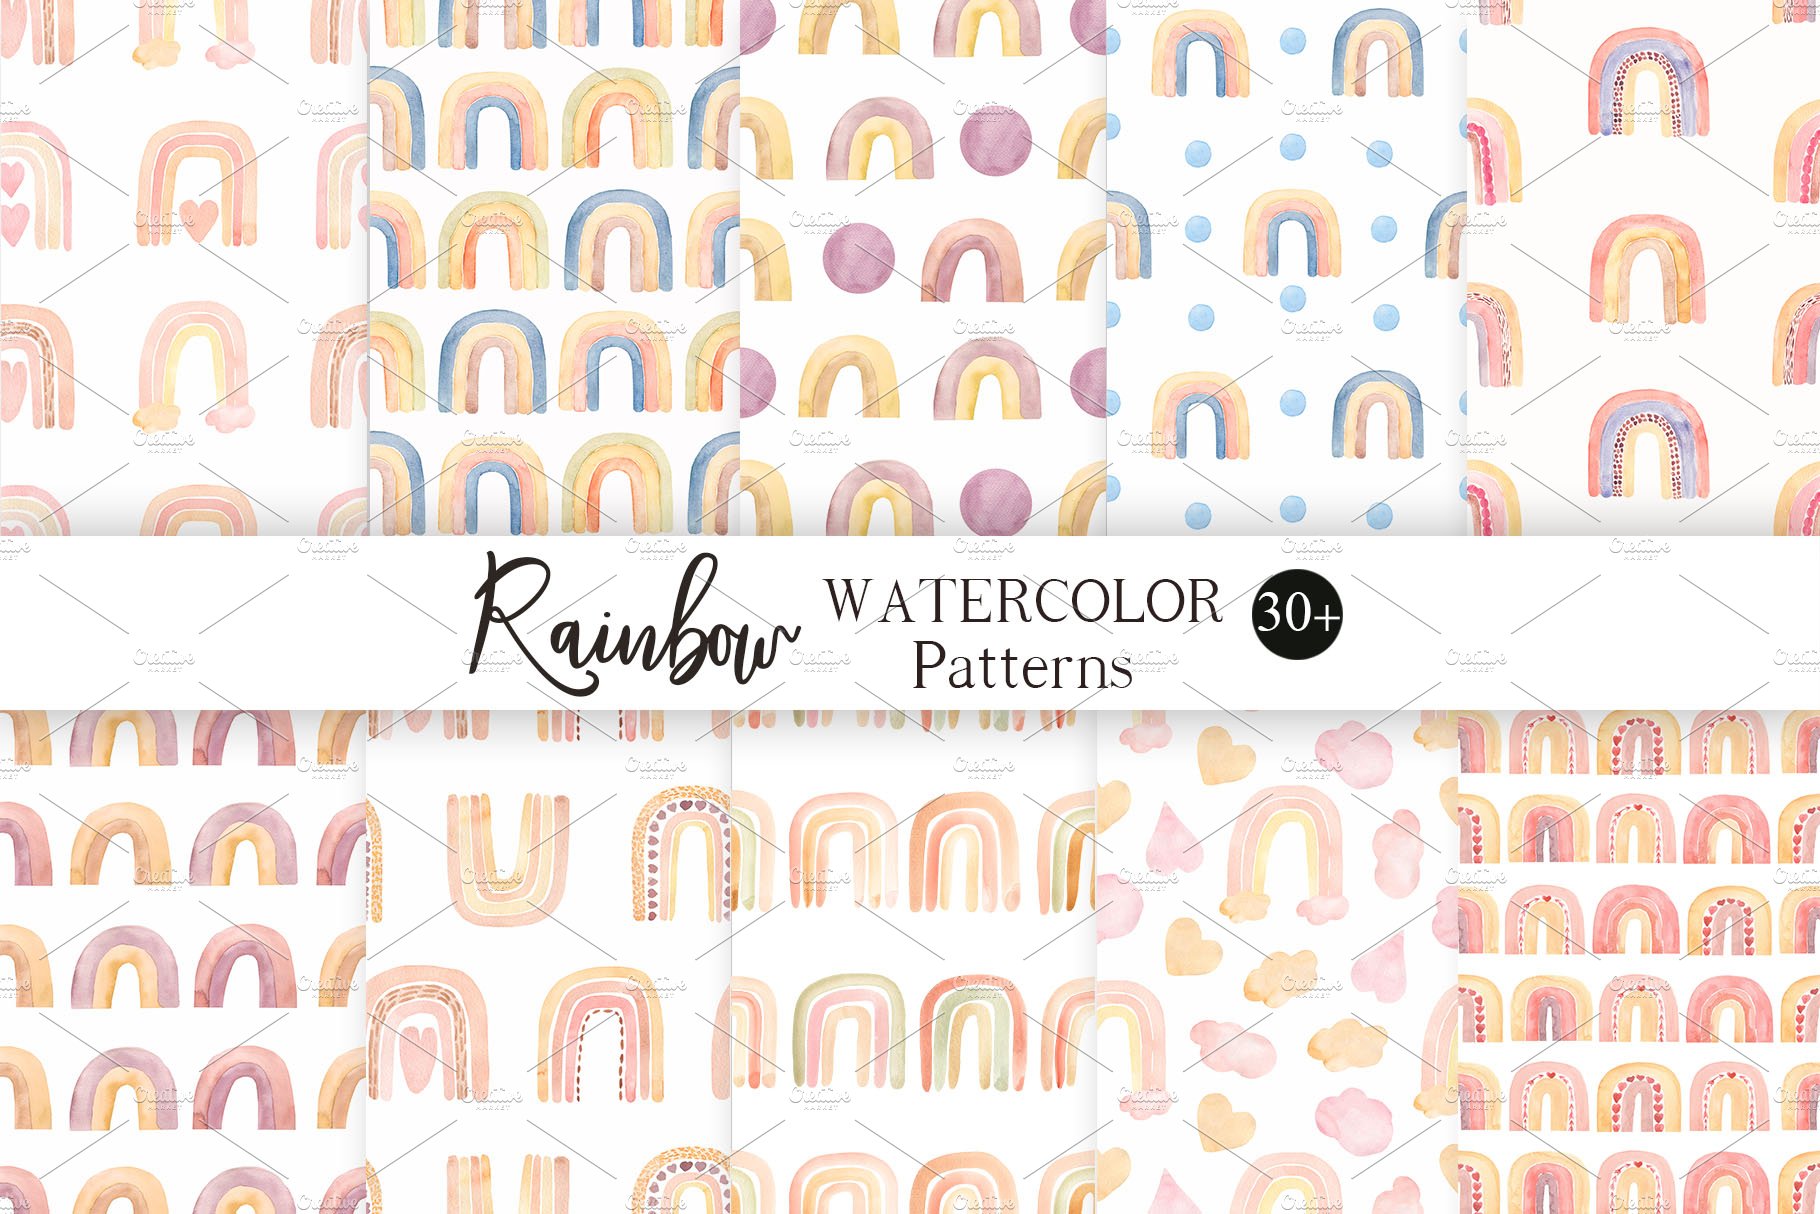 Watercolor Rainbows Pattern cover image.